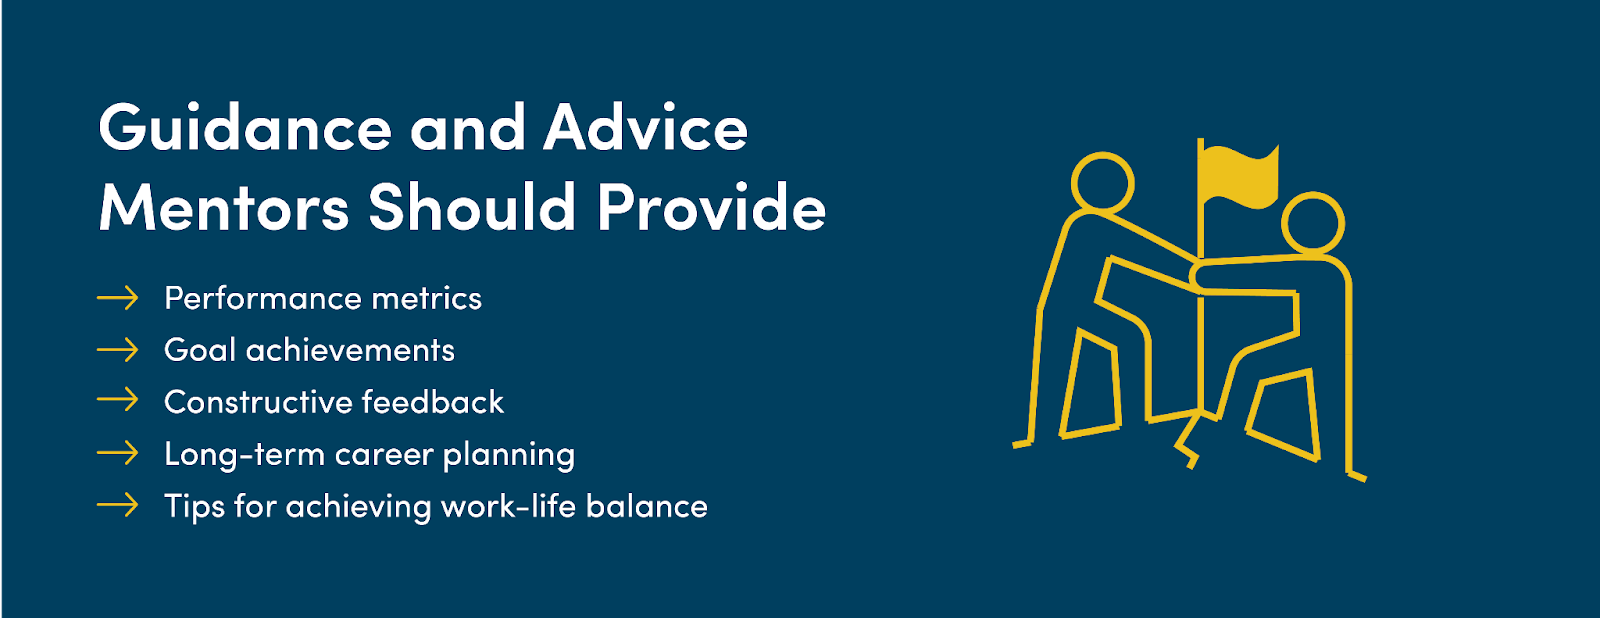 Guidance and advice mentors should provide